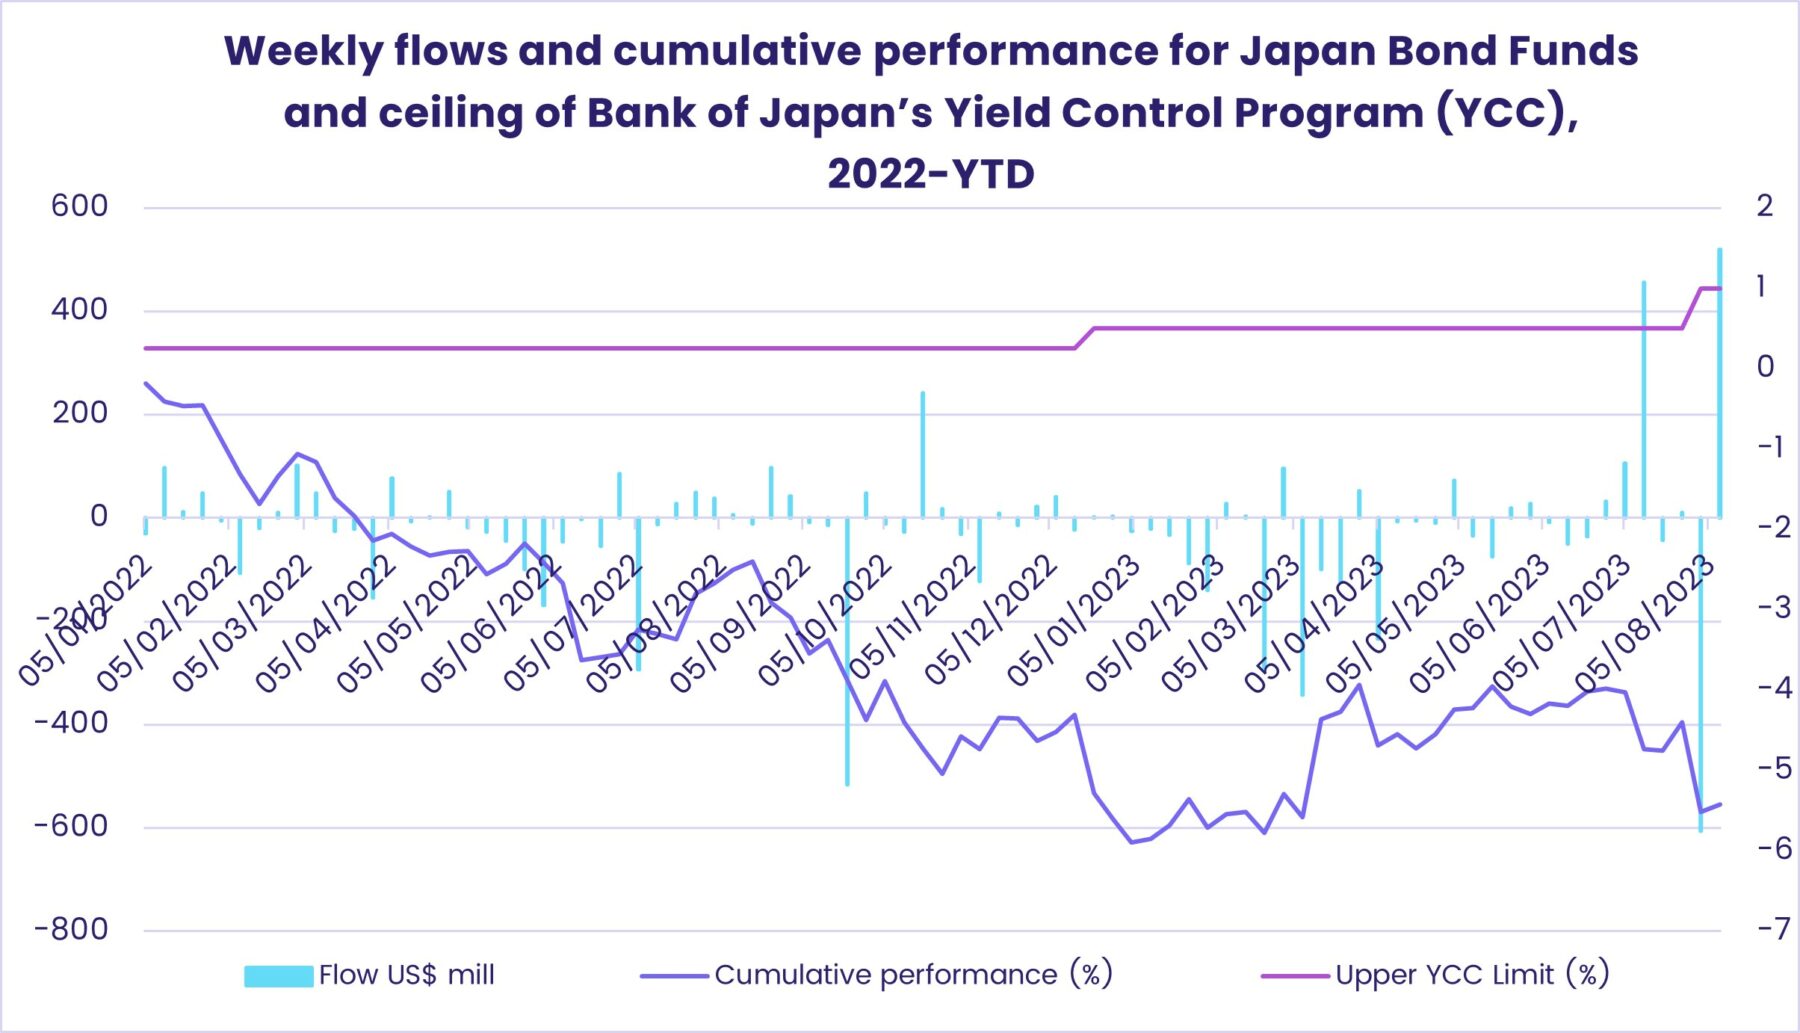 Image of a chart representing "Weekly flows and cumulative performance for Japan Bond Funds and ceiling of Bank of Japan's Yield Control Program (YCC), 2022-YTD"